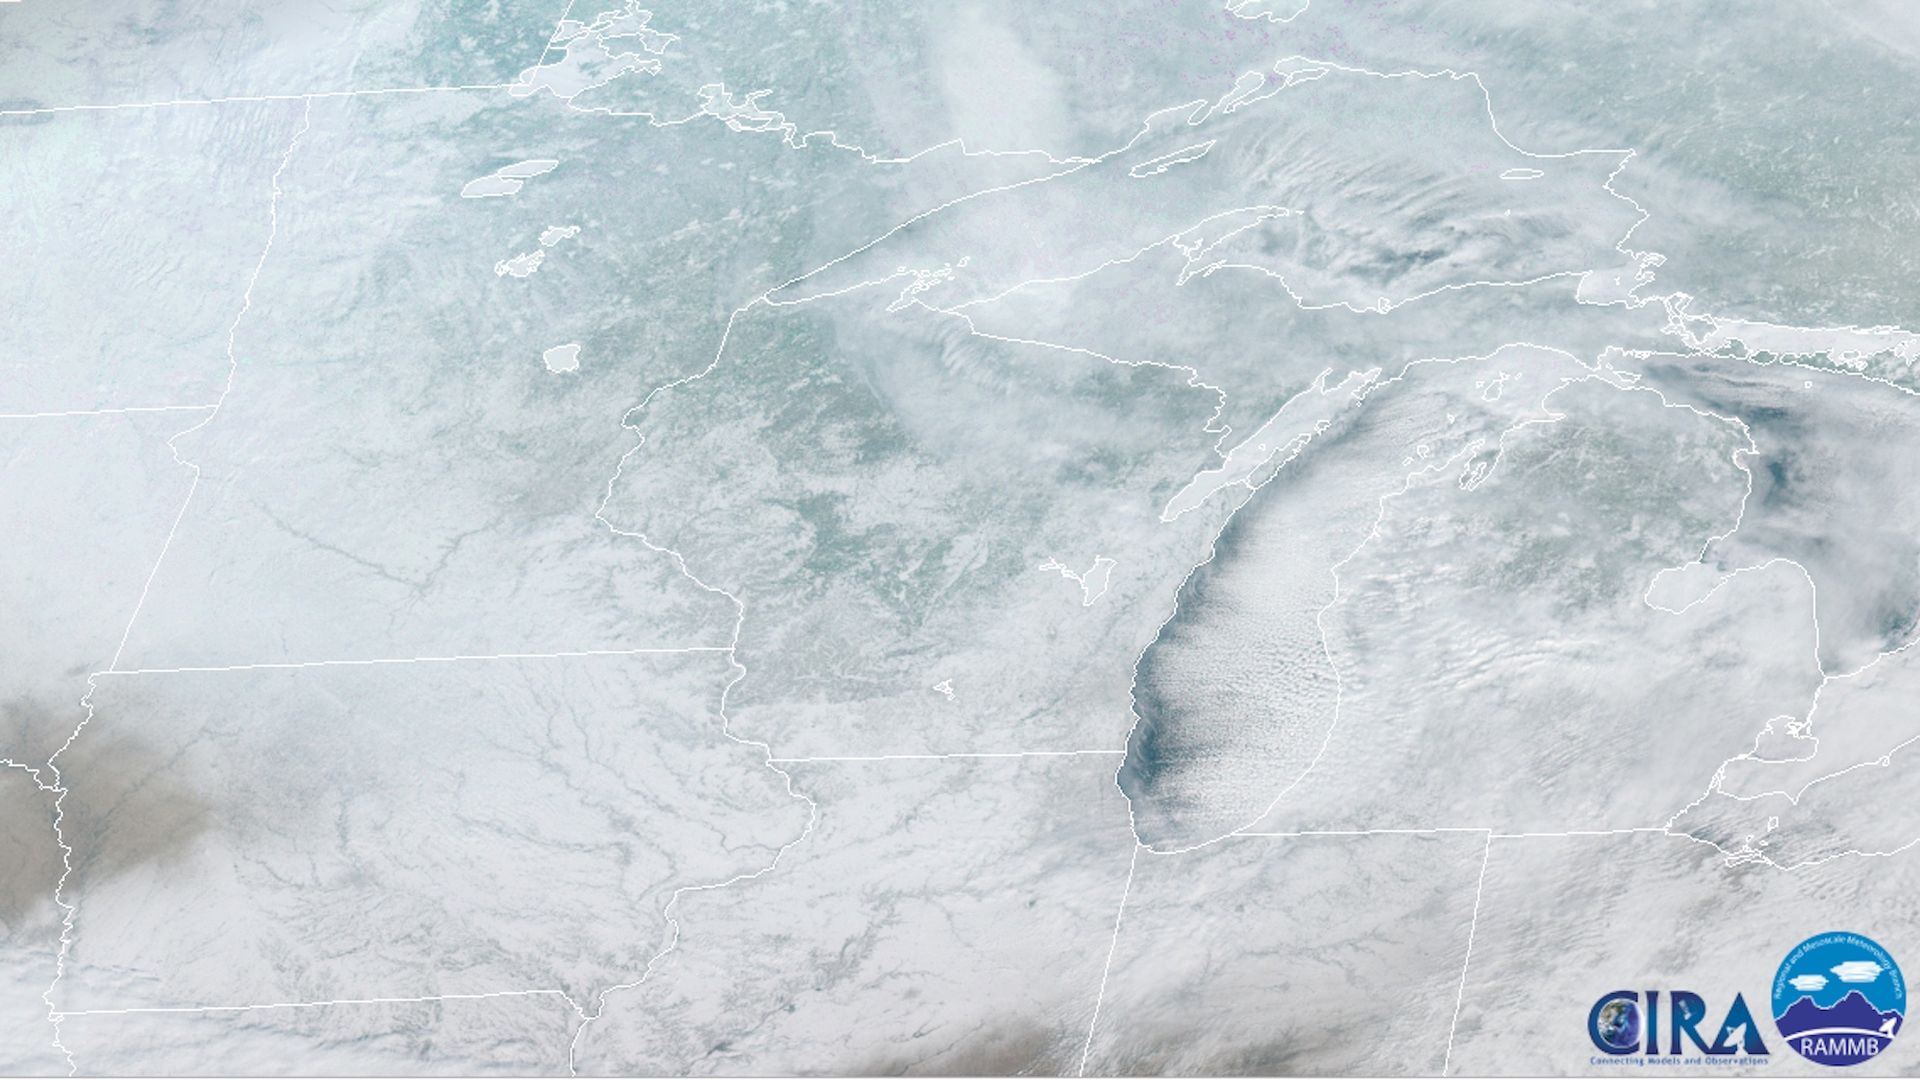 The frozen Midwest as seen from space.